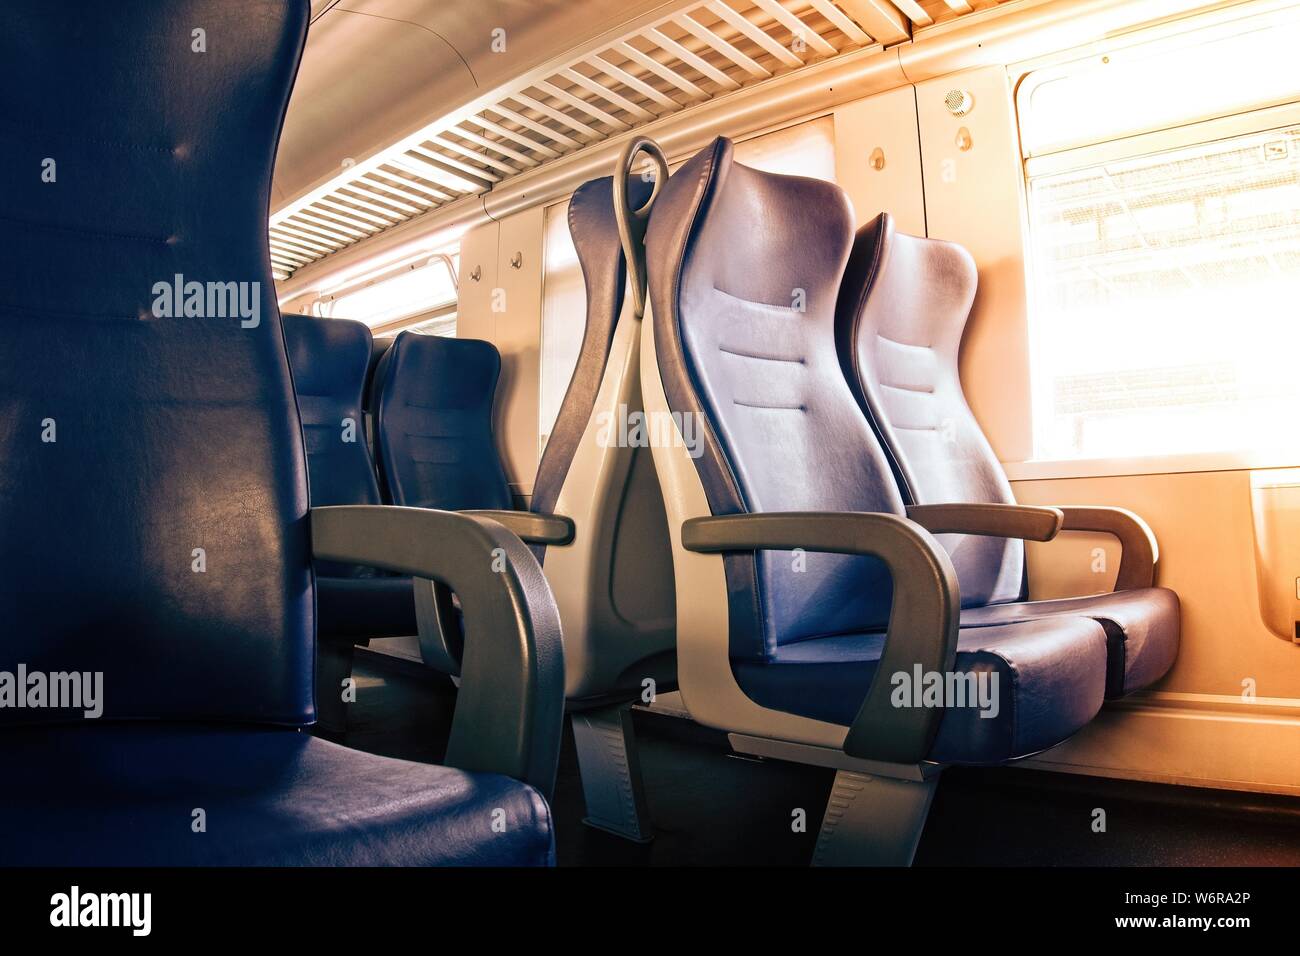 Interior of a passenger train with empty seats Stock Photo